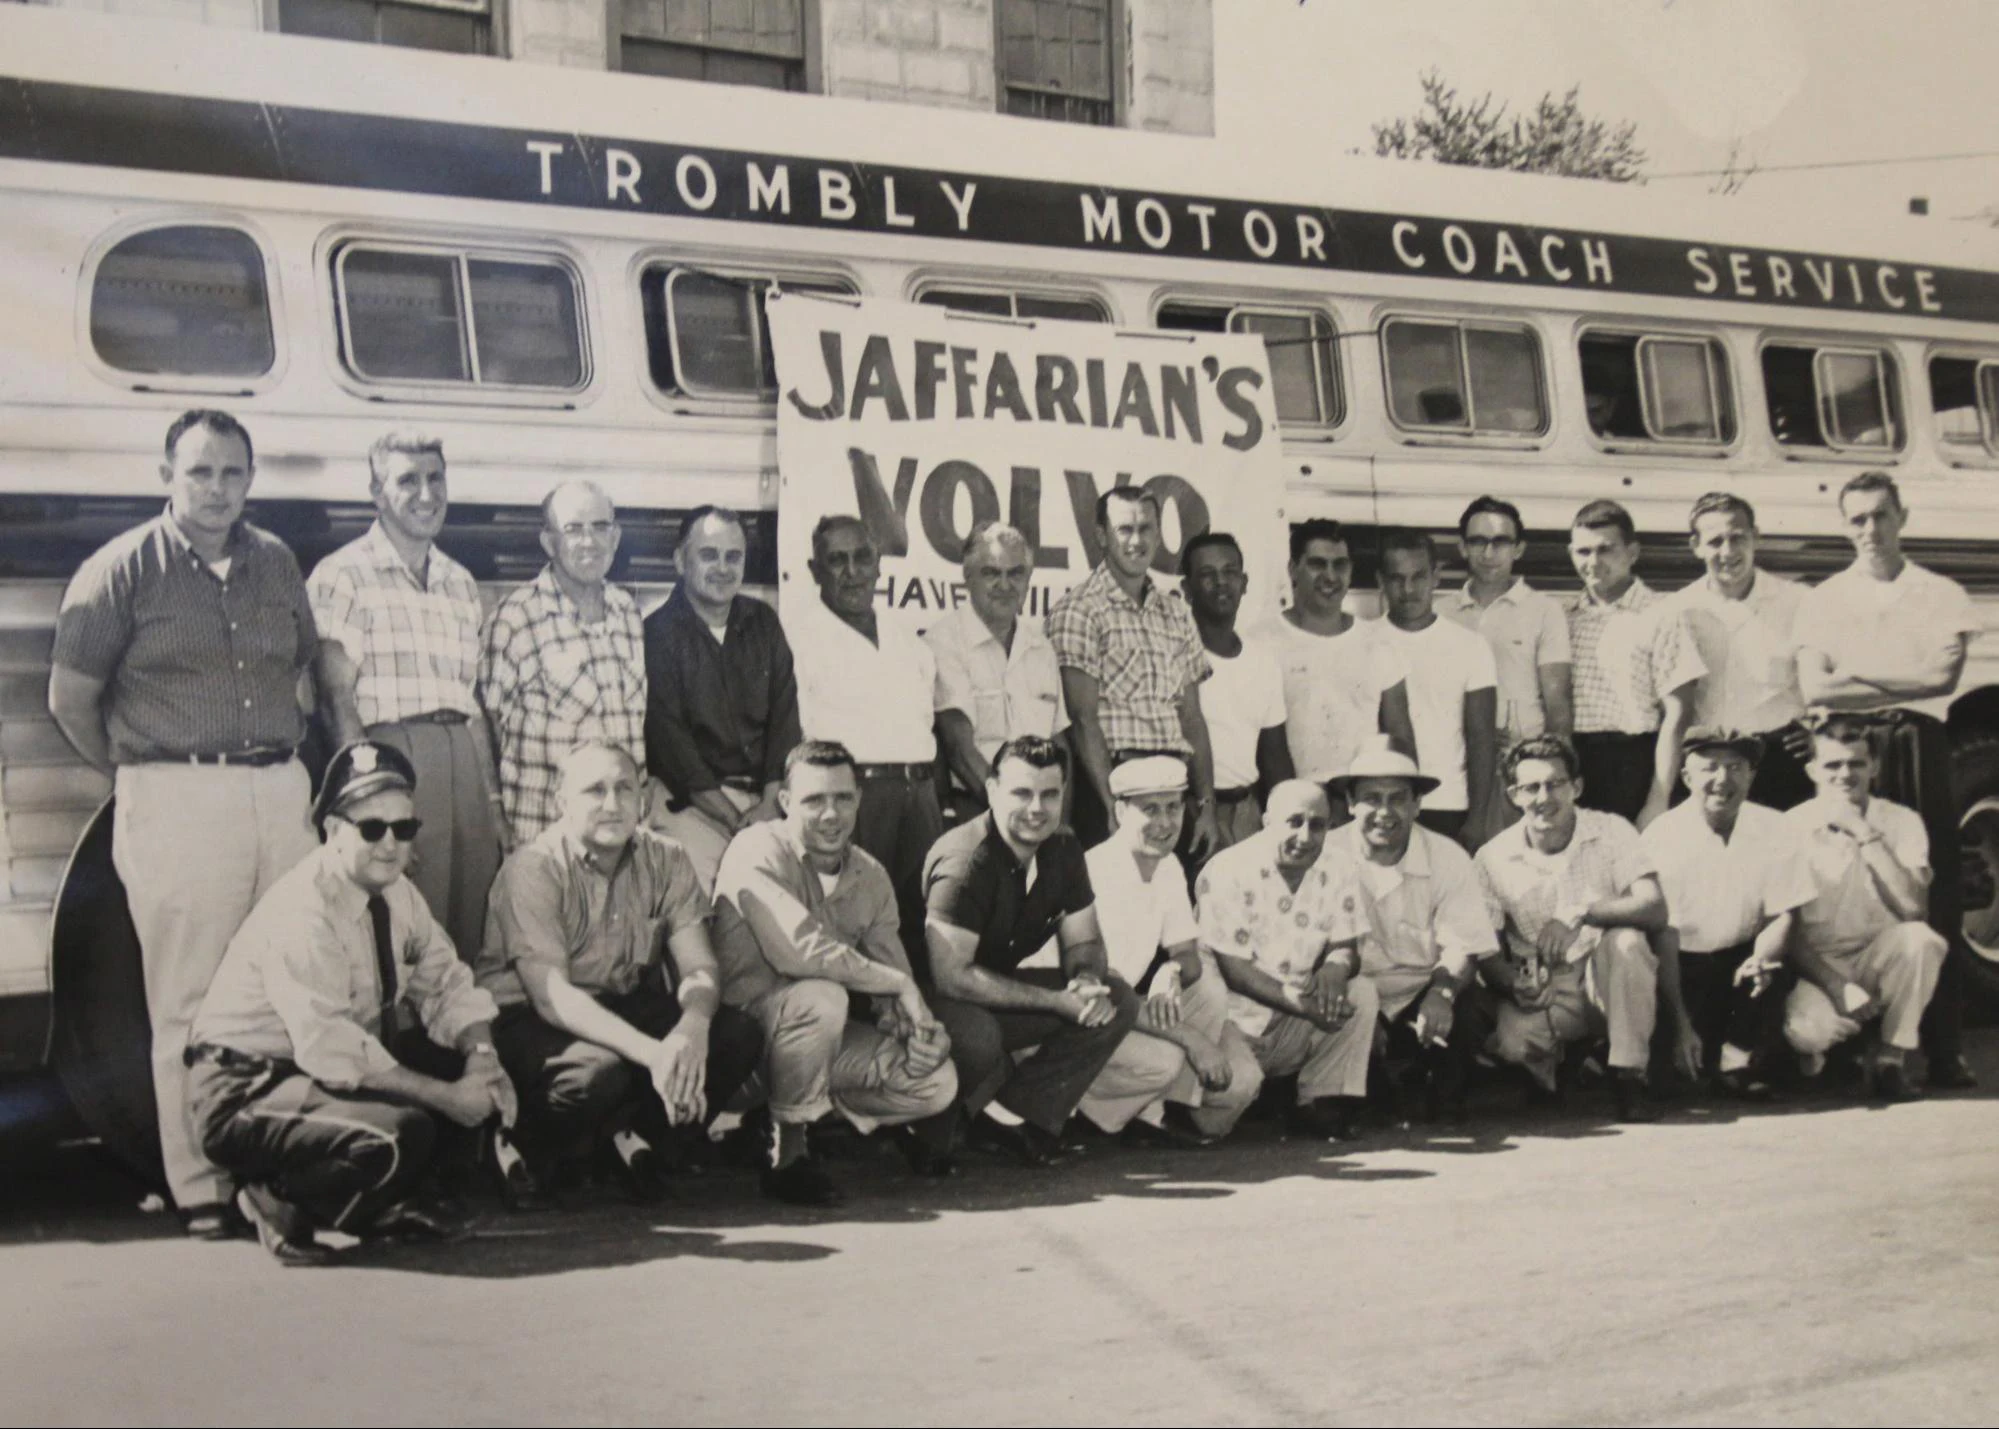 Jaffarian Volvo employees taking a group photo in front of an old bus